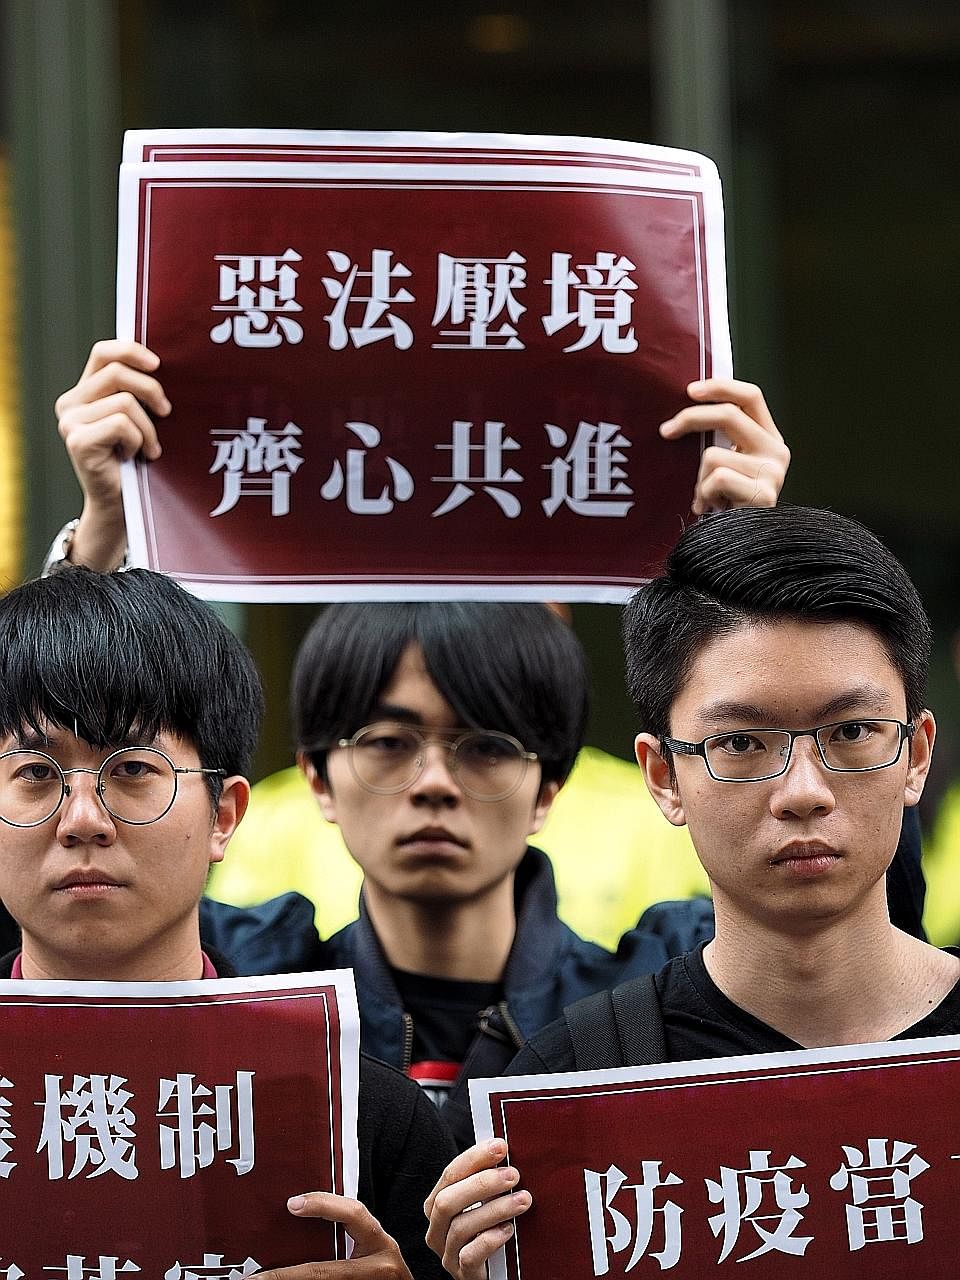 Far right: Hong Kong Chief Executive Carrie Lam at a press briefing in Beijing yesterday. She was in the Chinese capital to discuss Hong Kong's new security legislation. Right: Members of civic groups in Taiwan holding signs that said "The national s